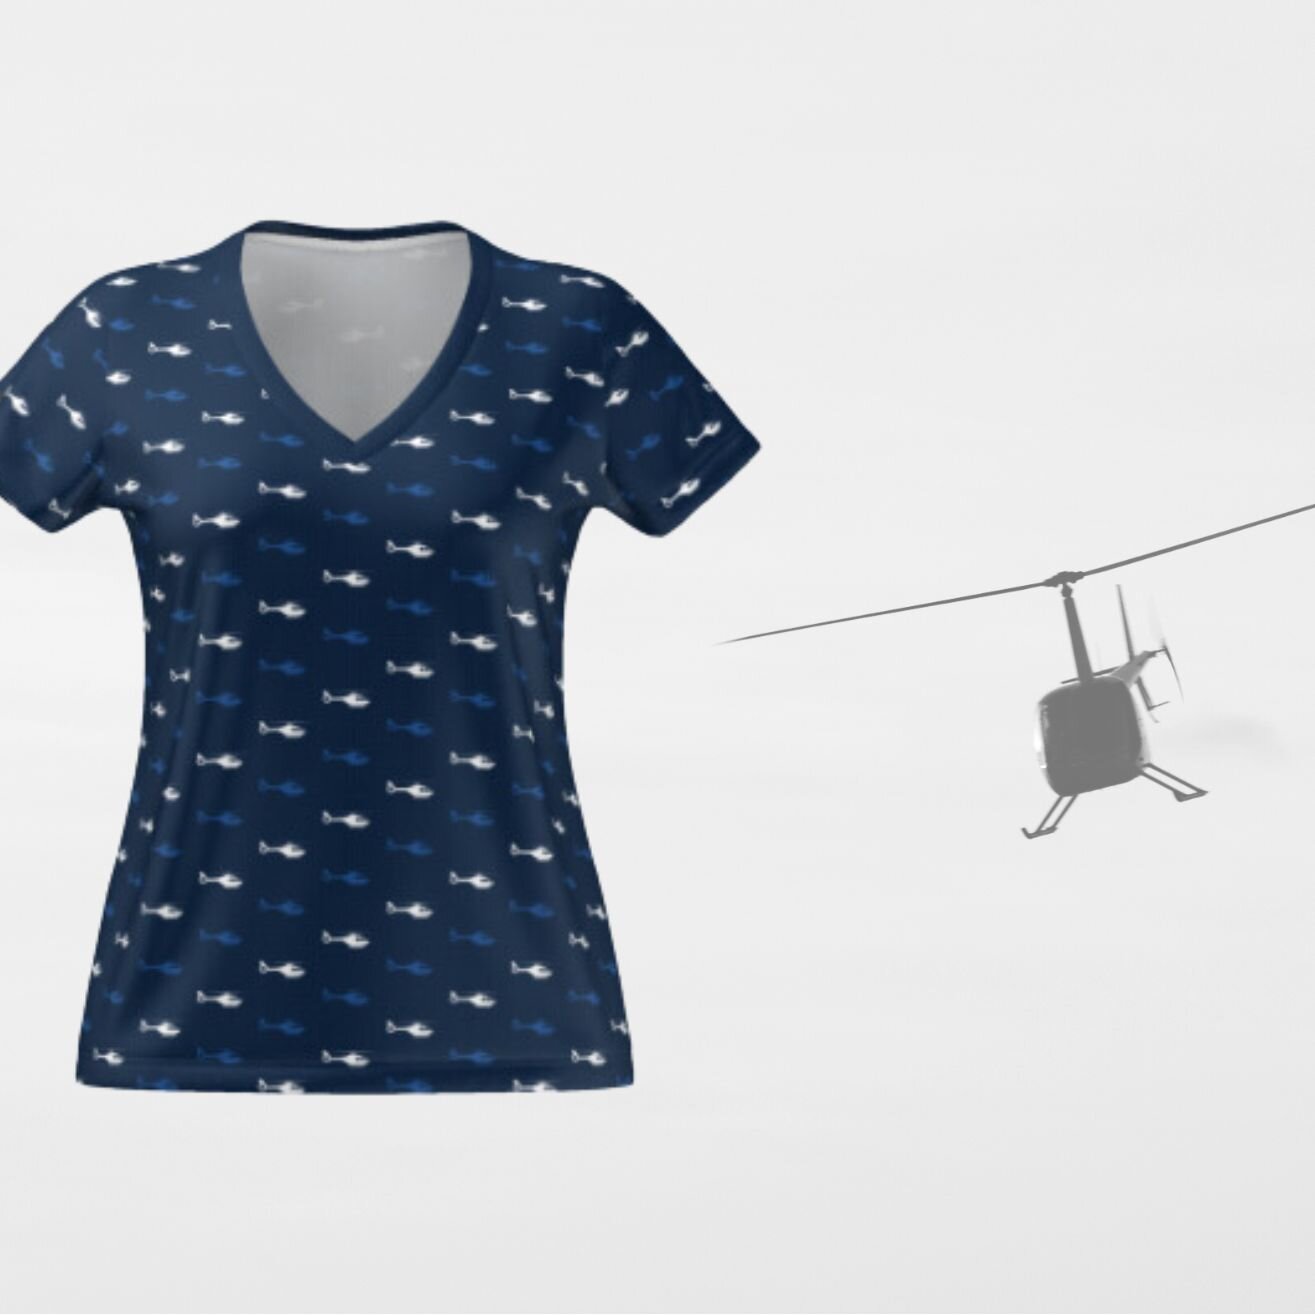 Looking for a shirt that shows off your love for helicopters? Our women's v-neck helicopter shirt is perfect for all you whirly girls out there! Made with 100% polyester micro interlock fabric and moisture-wicking treatment, it's comfortable and func